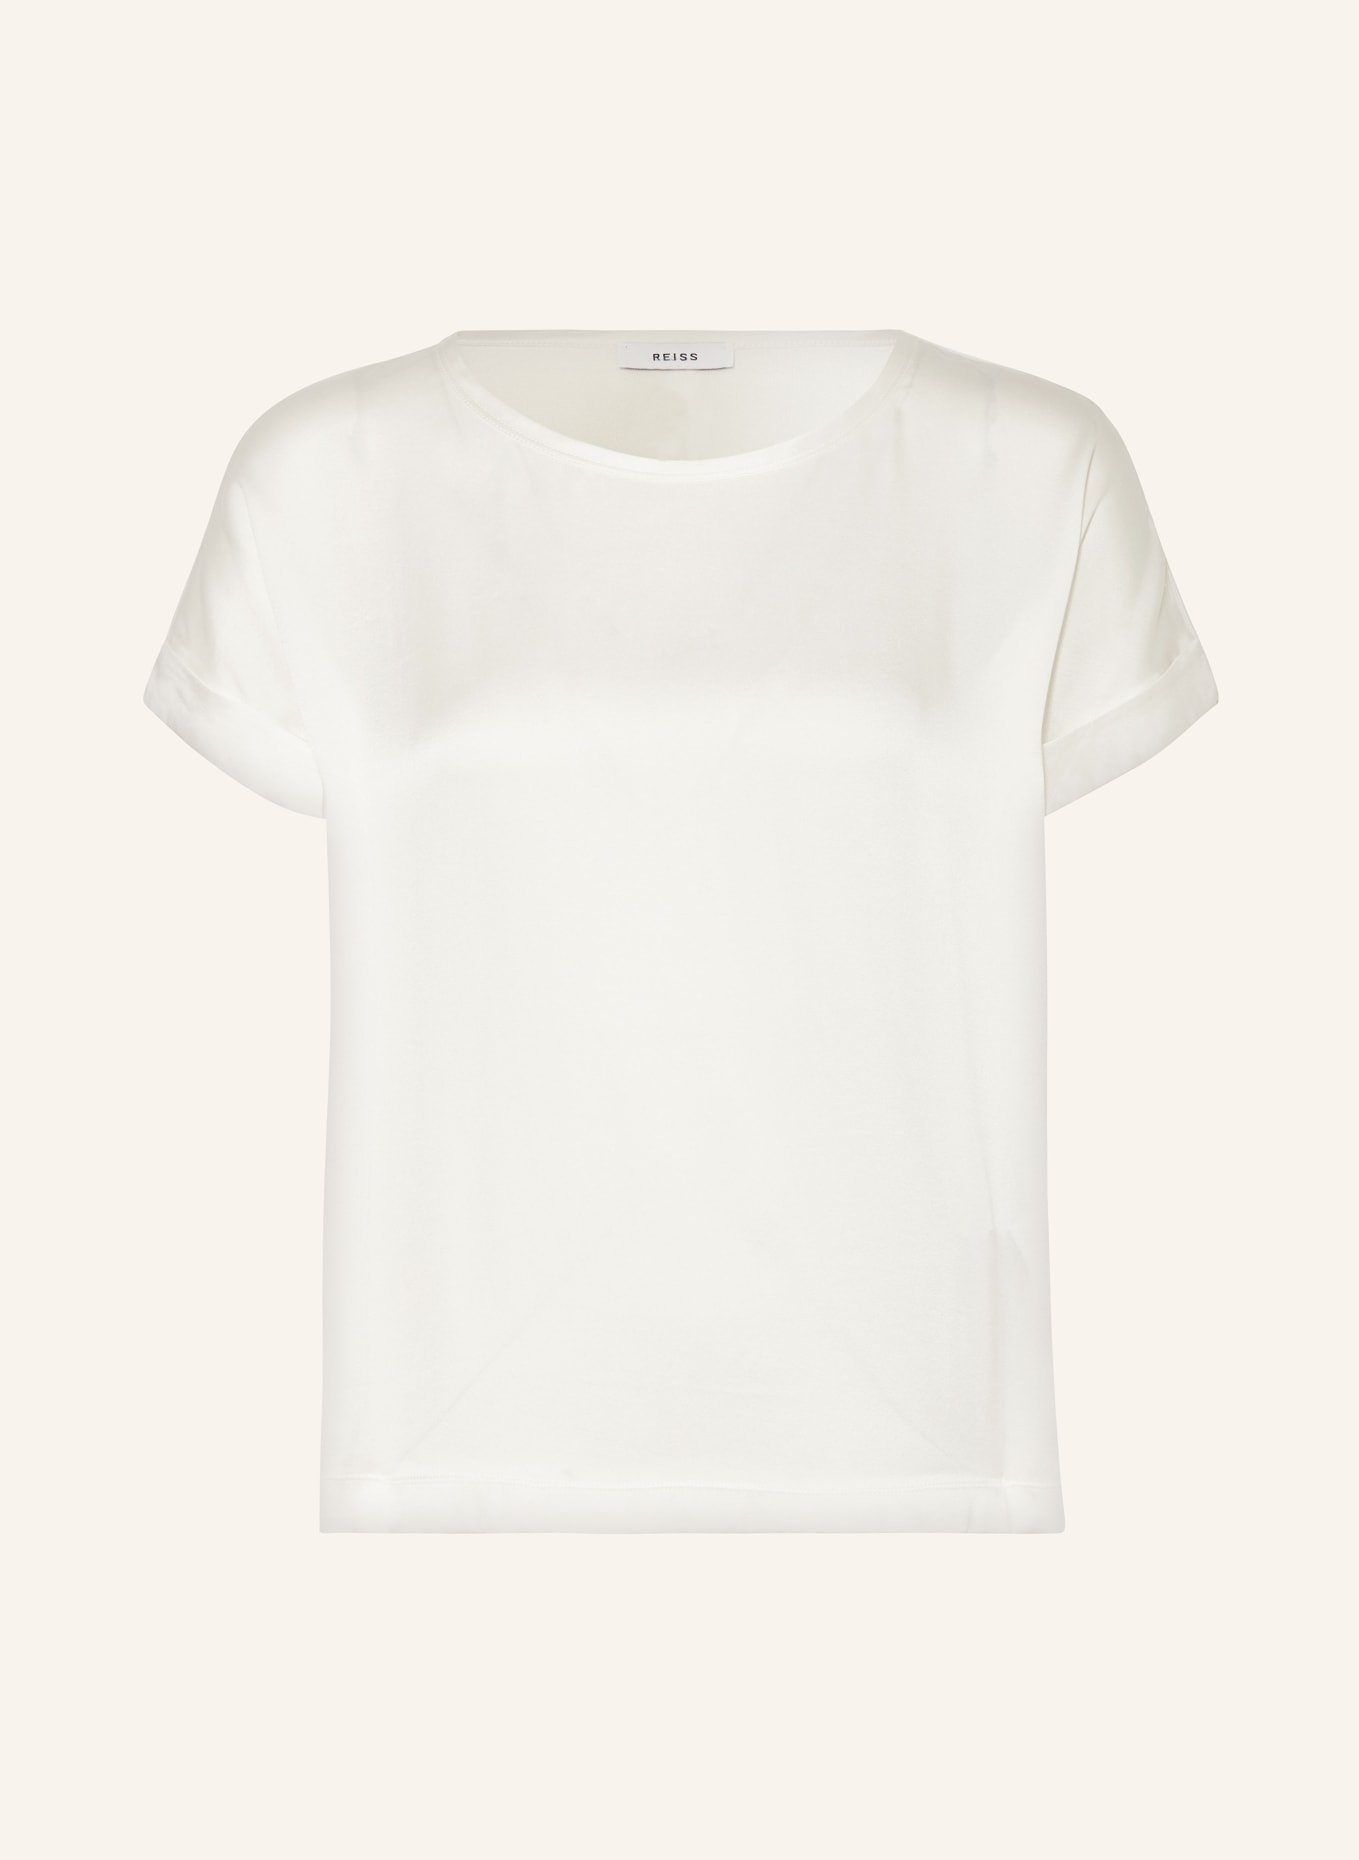 REISS T-shirt HELEN in mixed materials with silk, Color: ECRU (Image 1)